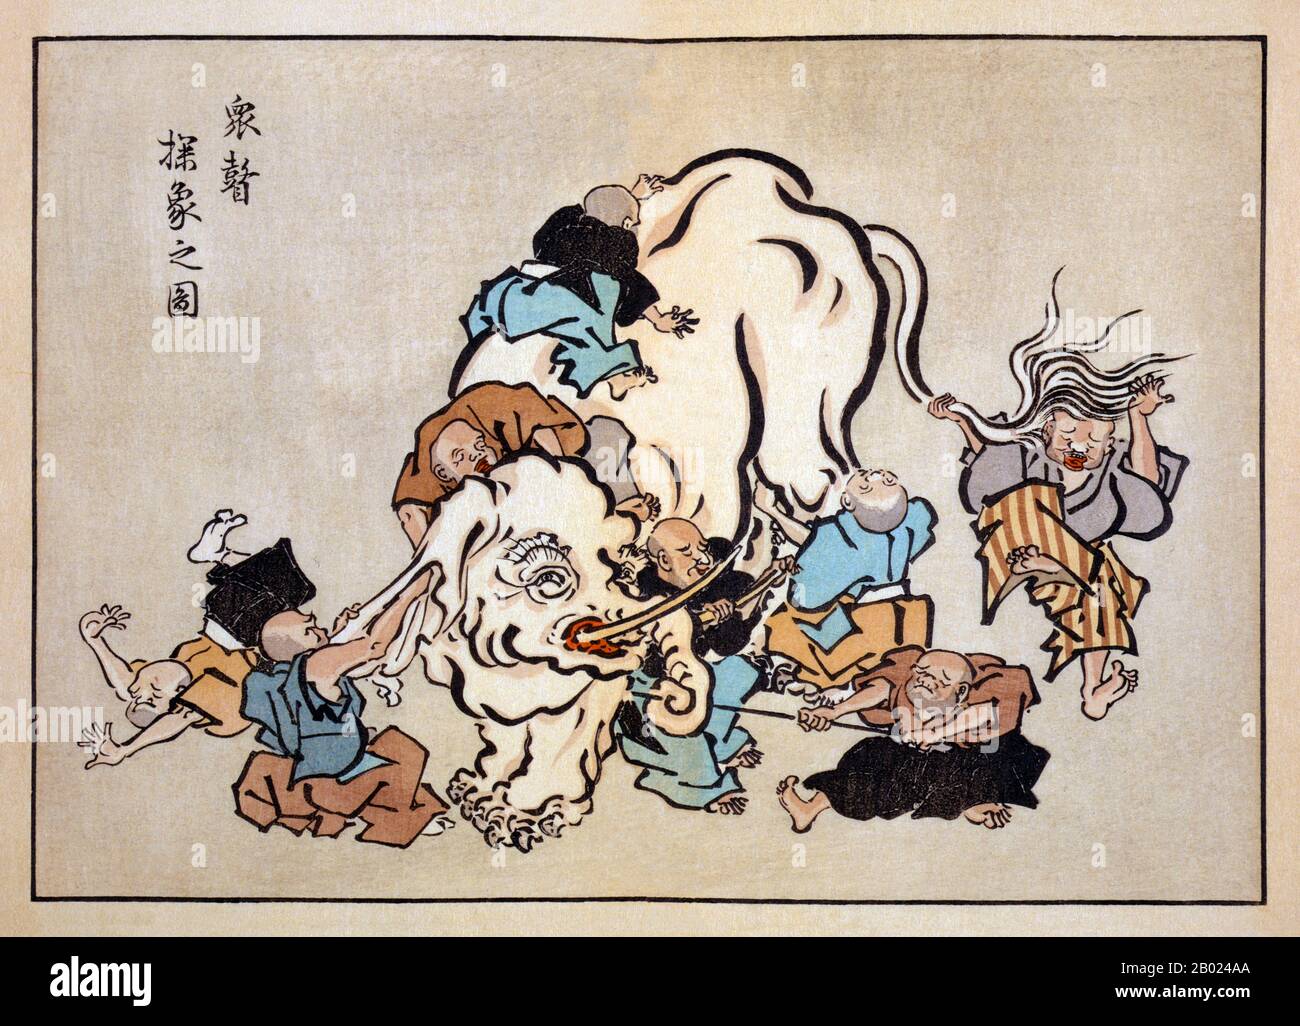 Ukiyo-e (浮世絵, literally 'pictures of the floating world') is a genre of Japanese woodblock prints (or woodcuts) and paintings produced between the 17th and the 20th centuries, featuring motifs of landscapes, tales from history, the theatre, and pleasure quarters. It is the main artistic genre of woodblock printing in Japan.  The story of the blind men and an elephant originated in Indian subcontinent from where it has widely diffused. It has been used to illustrate a range of truths and fallacies. At various times it has provided insight into the relativism, opaqueness or inexpressible nature Stock Photo